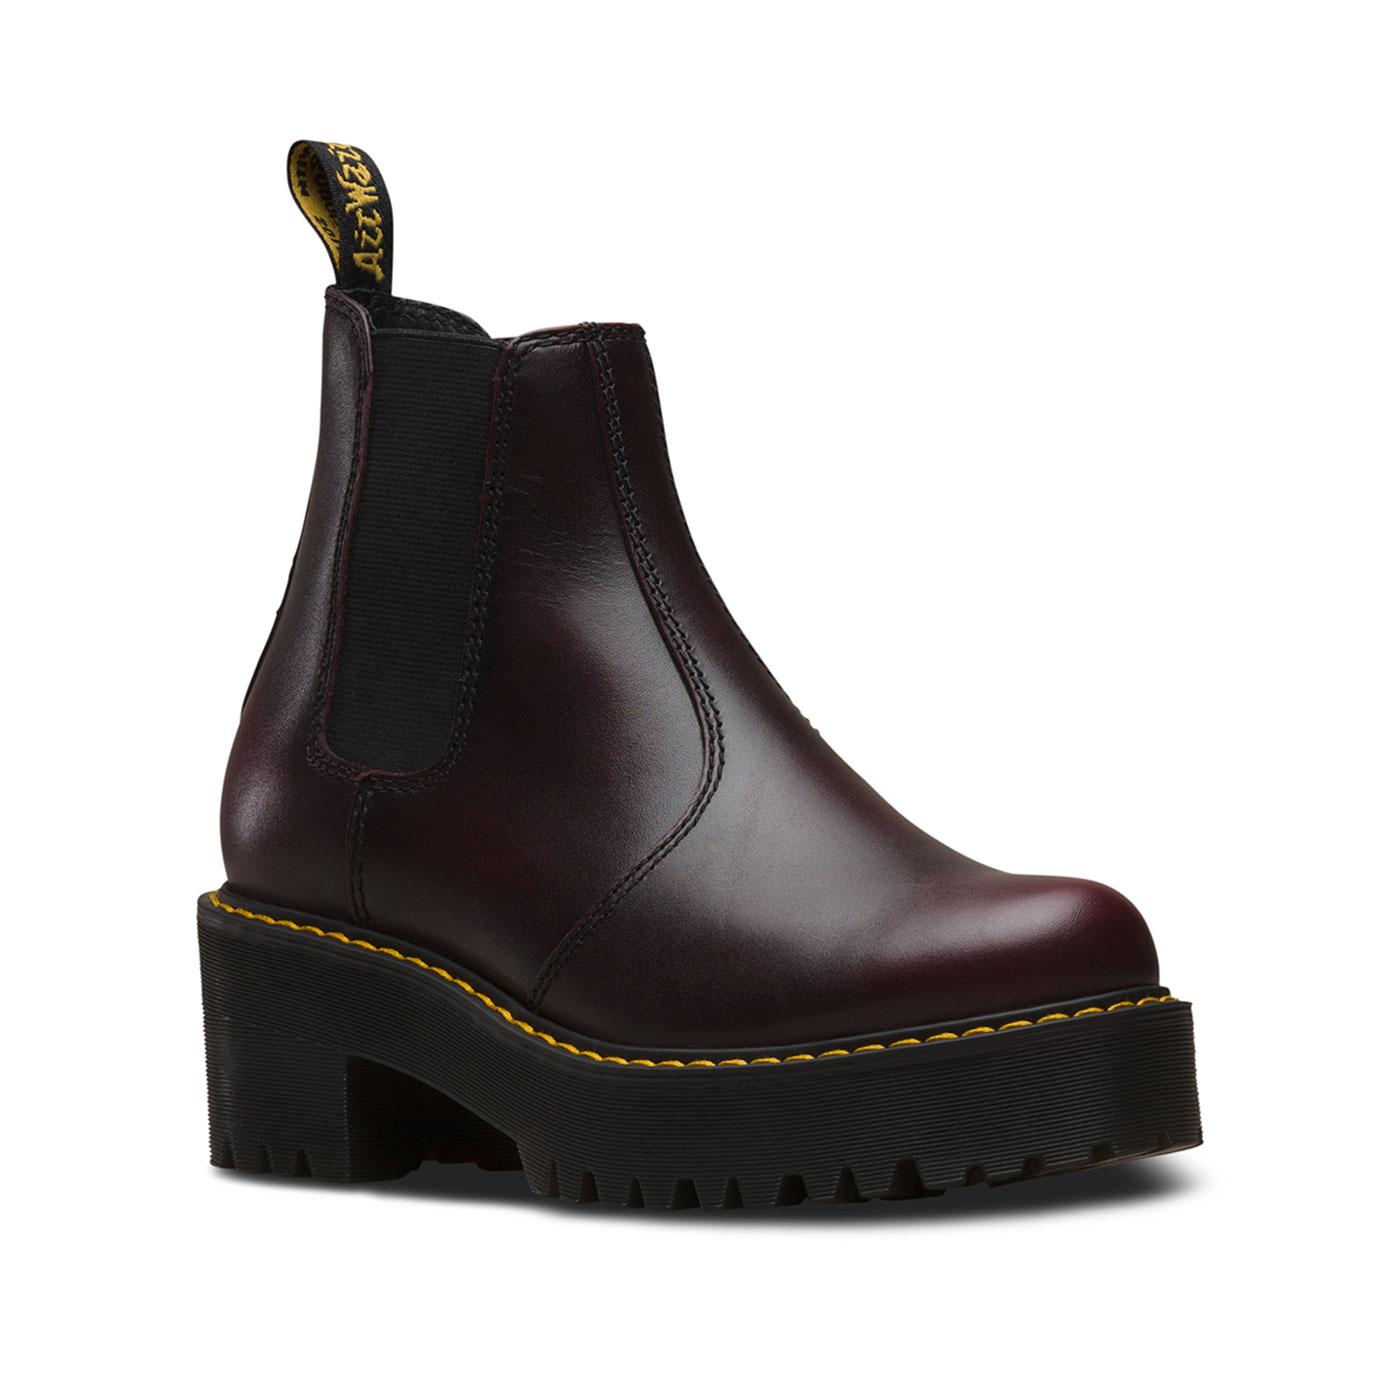 Rometty DR MARTENS WOMENS Vintage Boots Burgundy